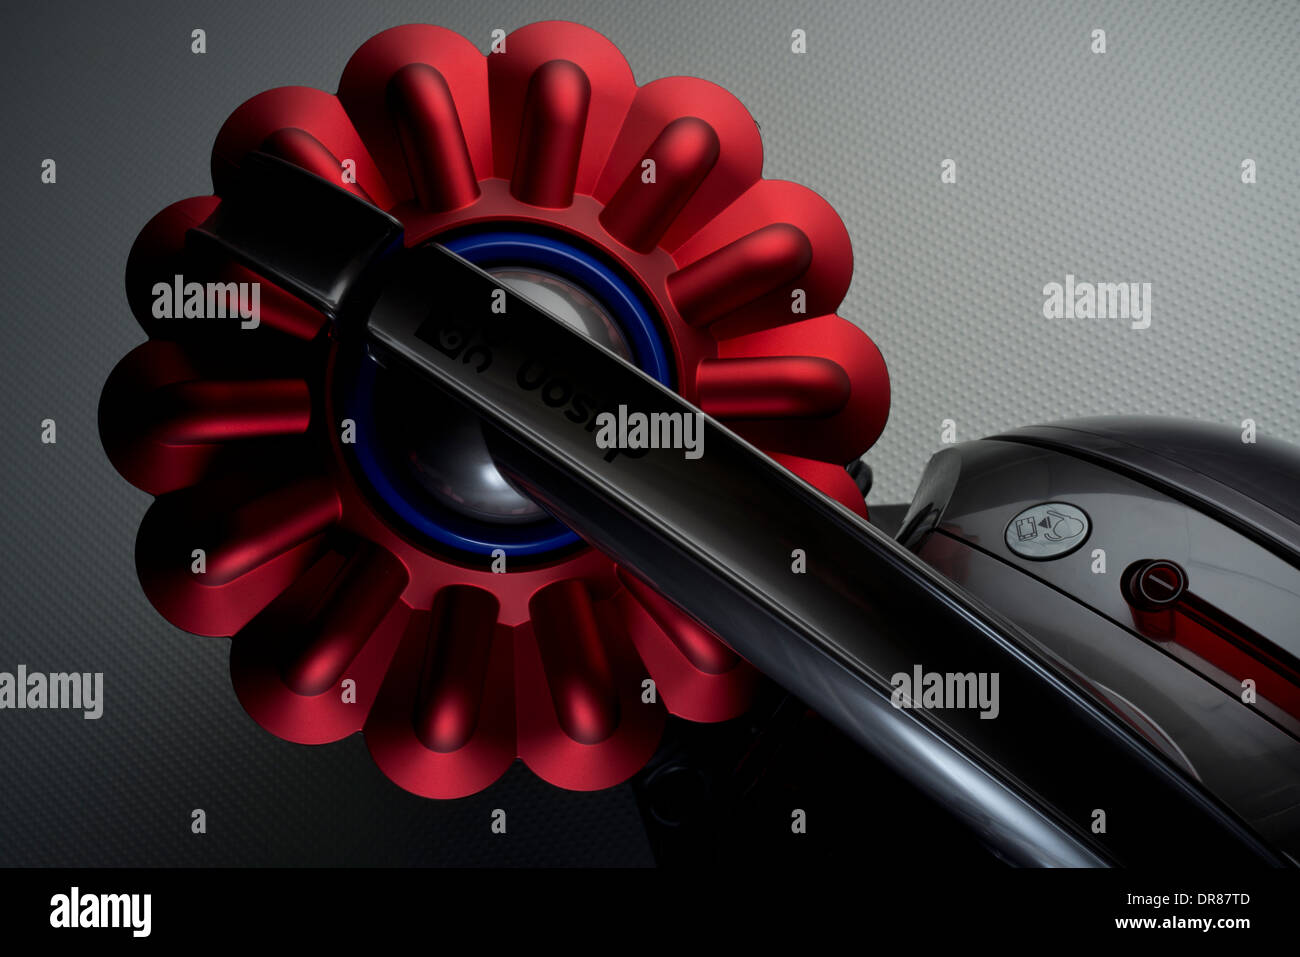 Dyson cylinder vacuum cleaner. Model, DG 39 animal, with ball. Stock Photo